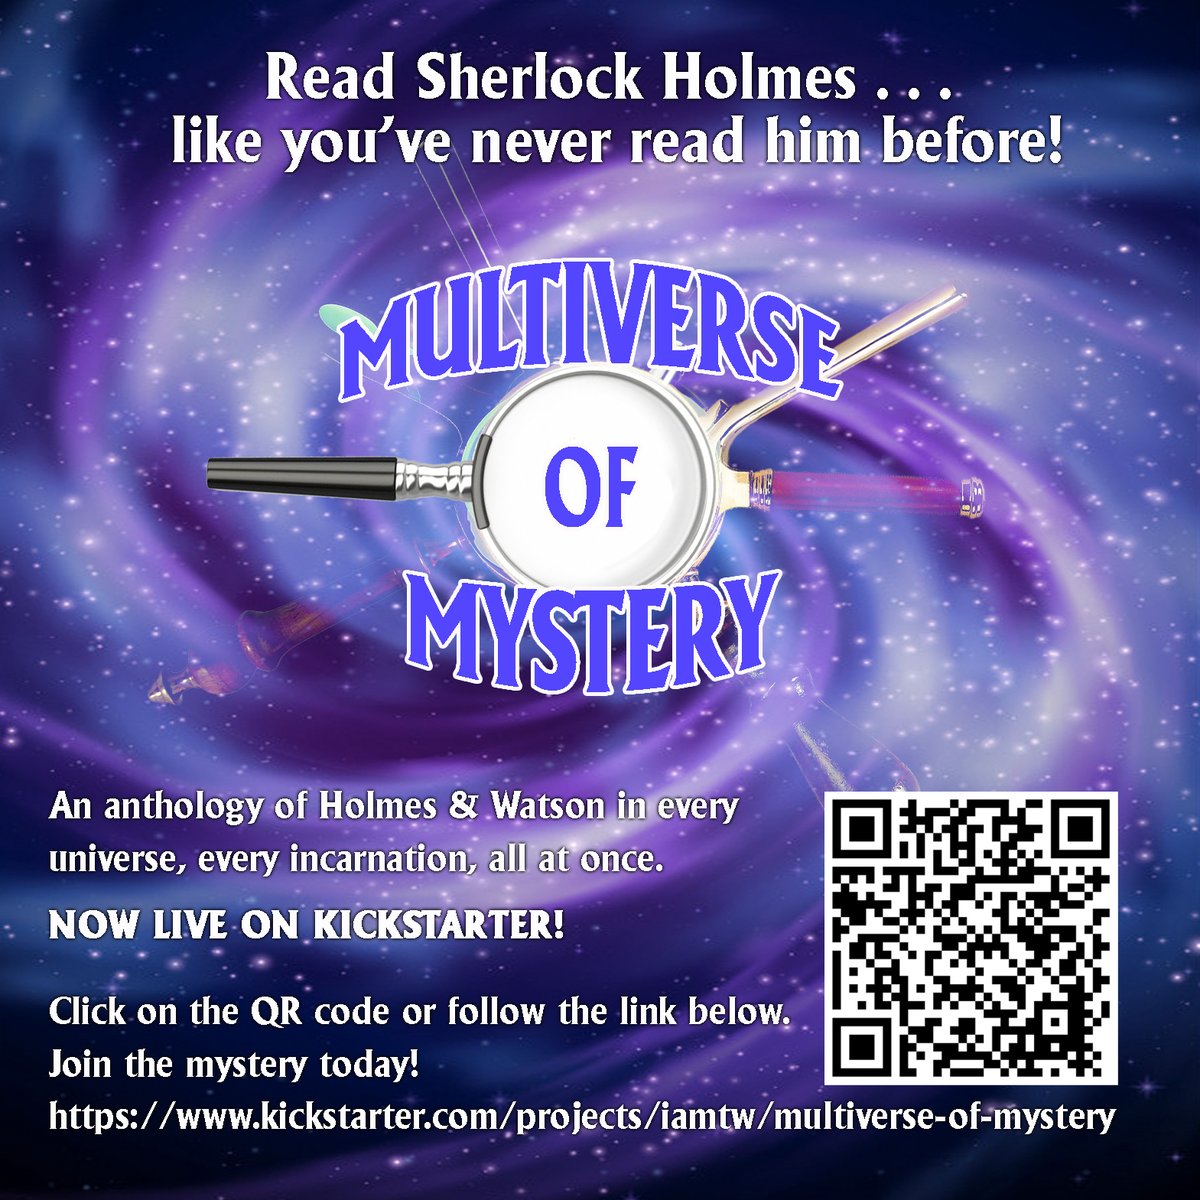 FLASH! Diane Duane will be joining the Multiverse of Mystery. Well, that is, if we can reach our first stretch goal, then we can add a brand new story. Now, there's even more of a reason to be back us. Please join the campaign! kickstarter.com/projects/iamtw…